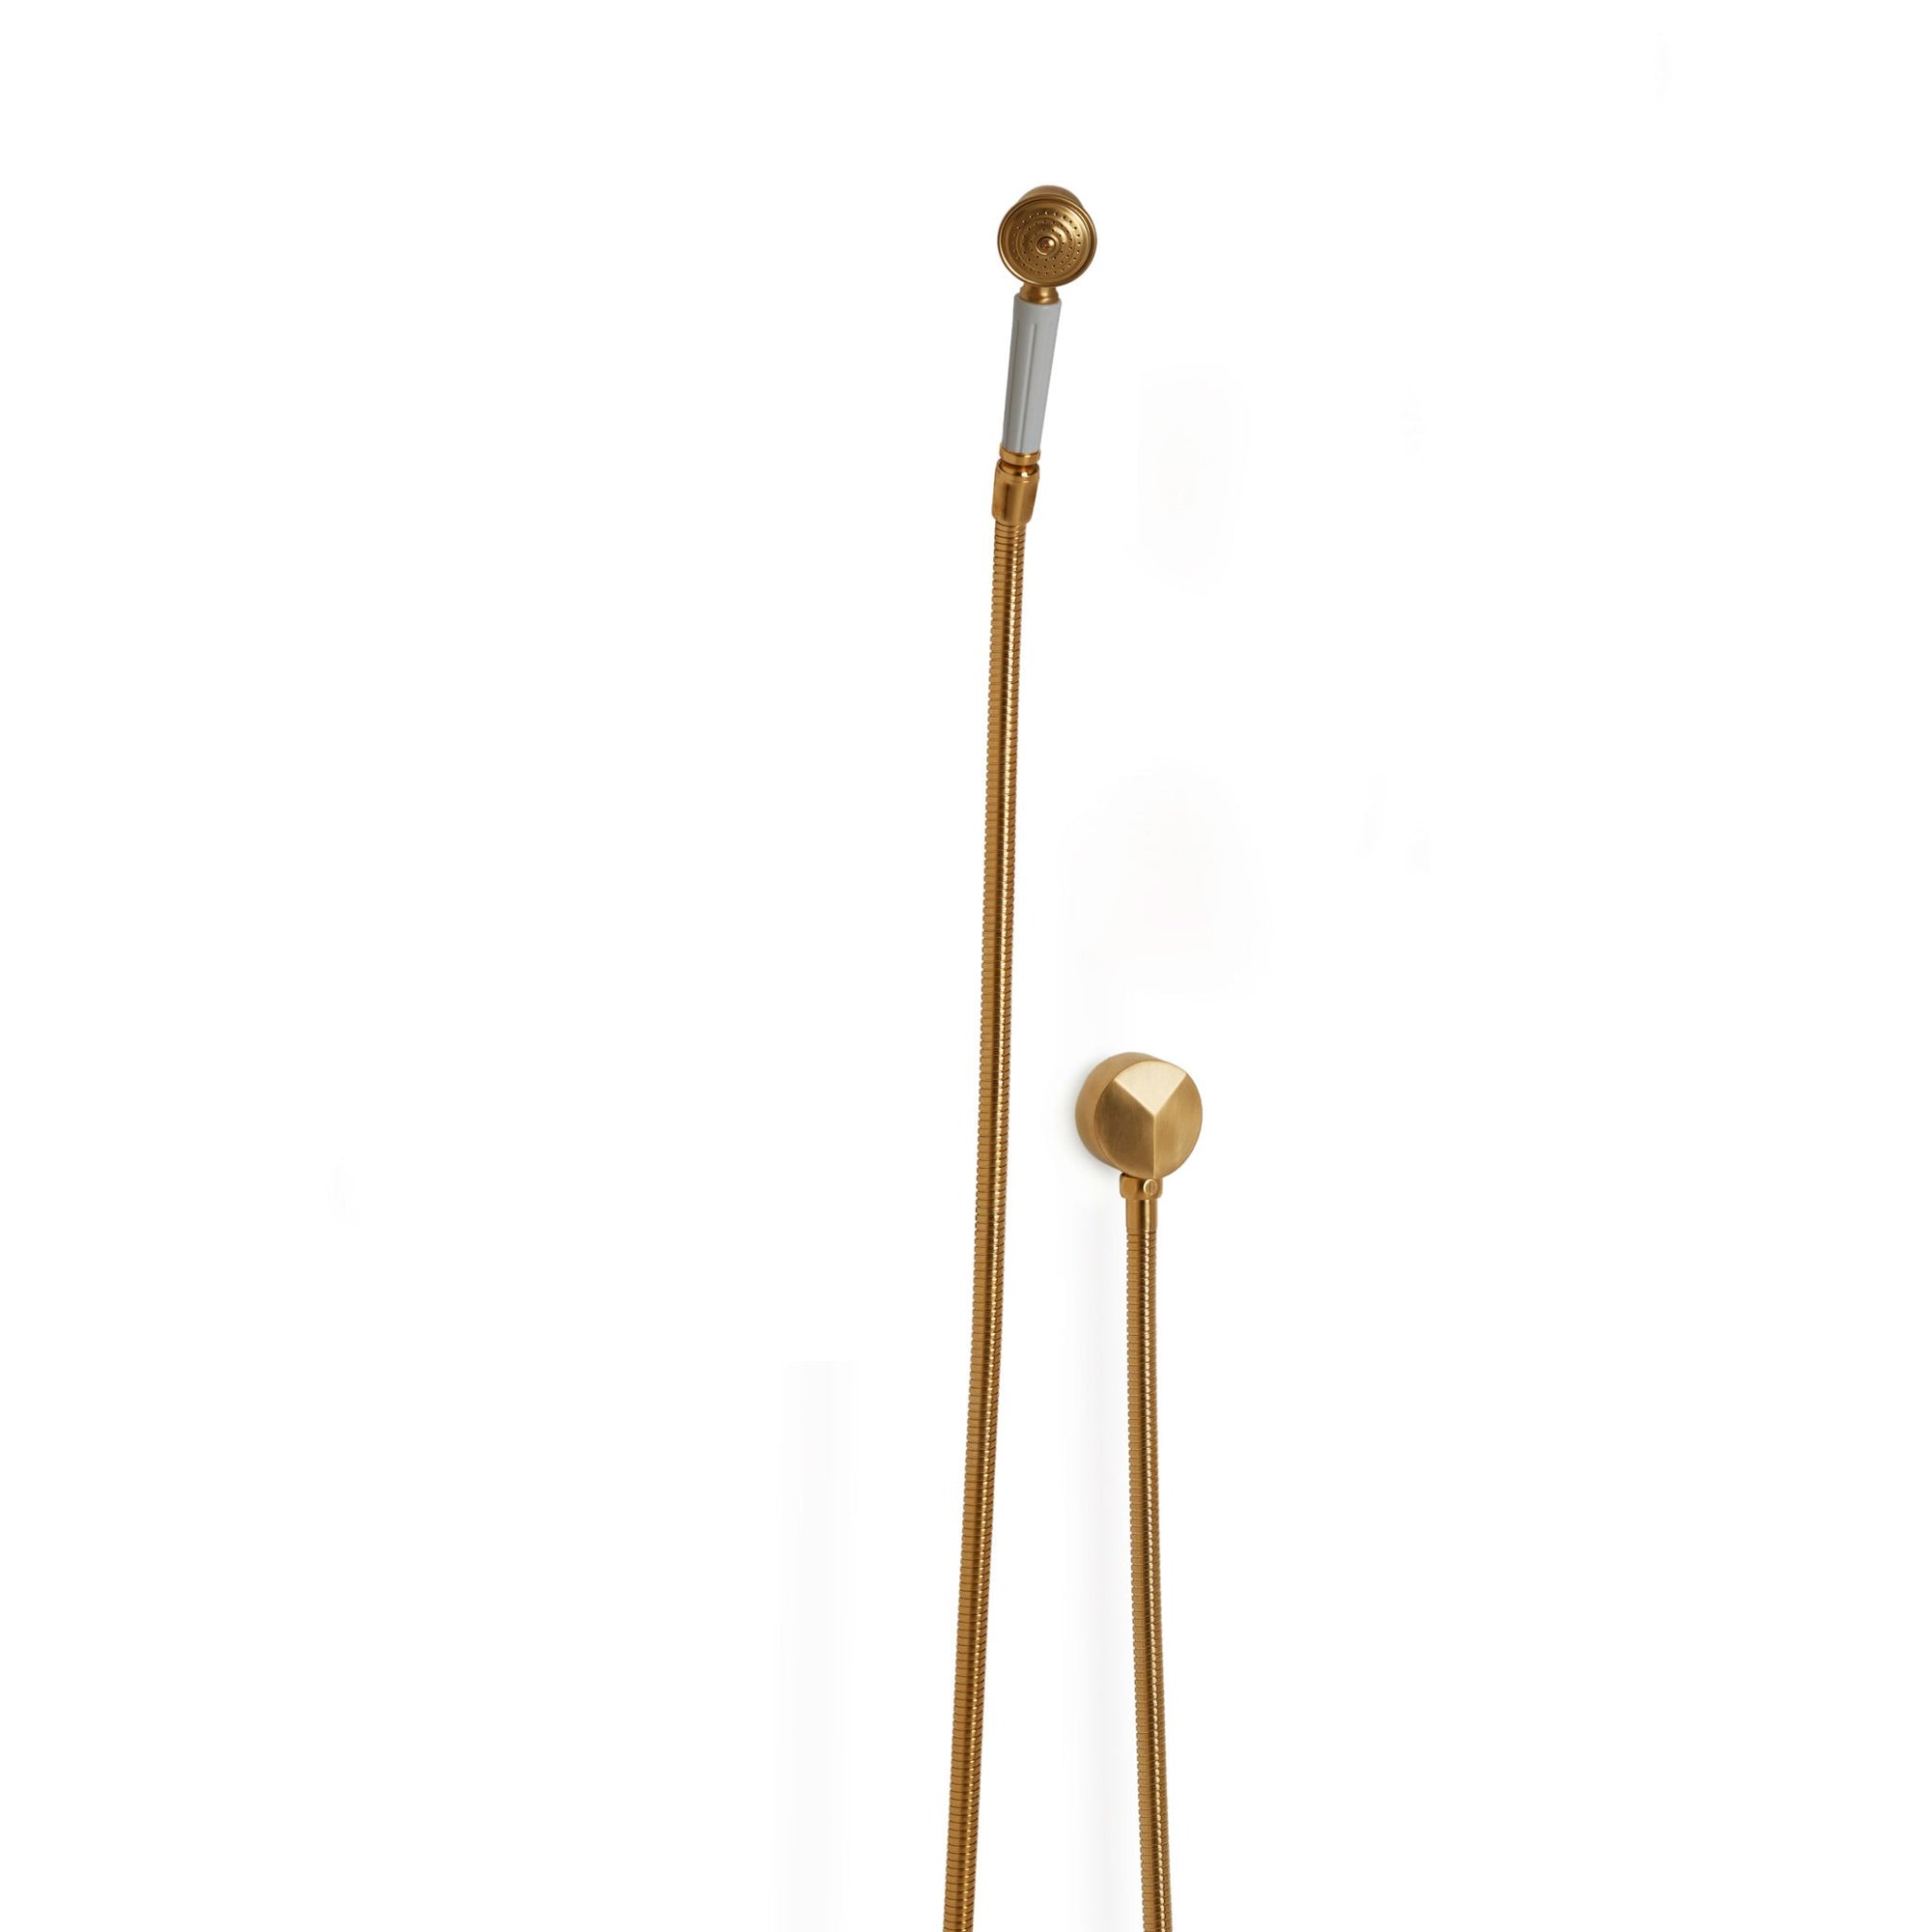 0839SPLY-GP Sherle Wagner International Fluted Hand Shower with Hose and 90 Degree Supply in Gold Plate metal finish